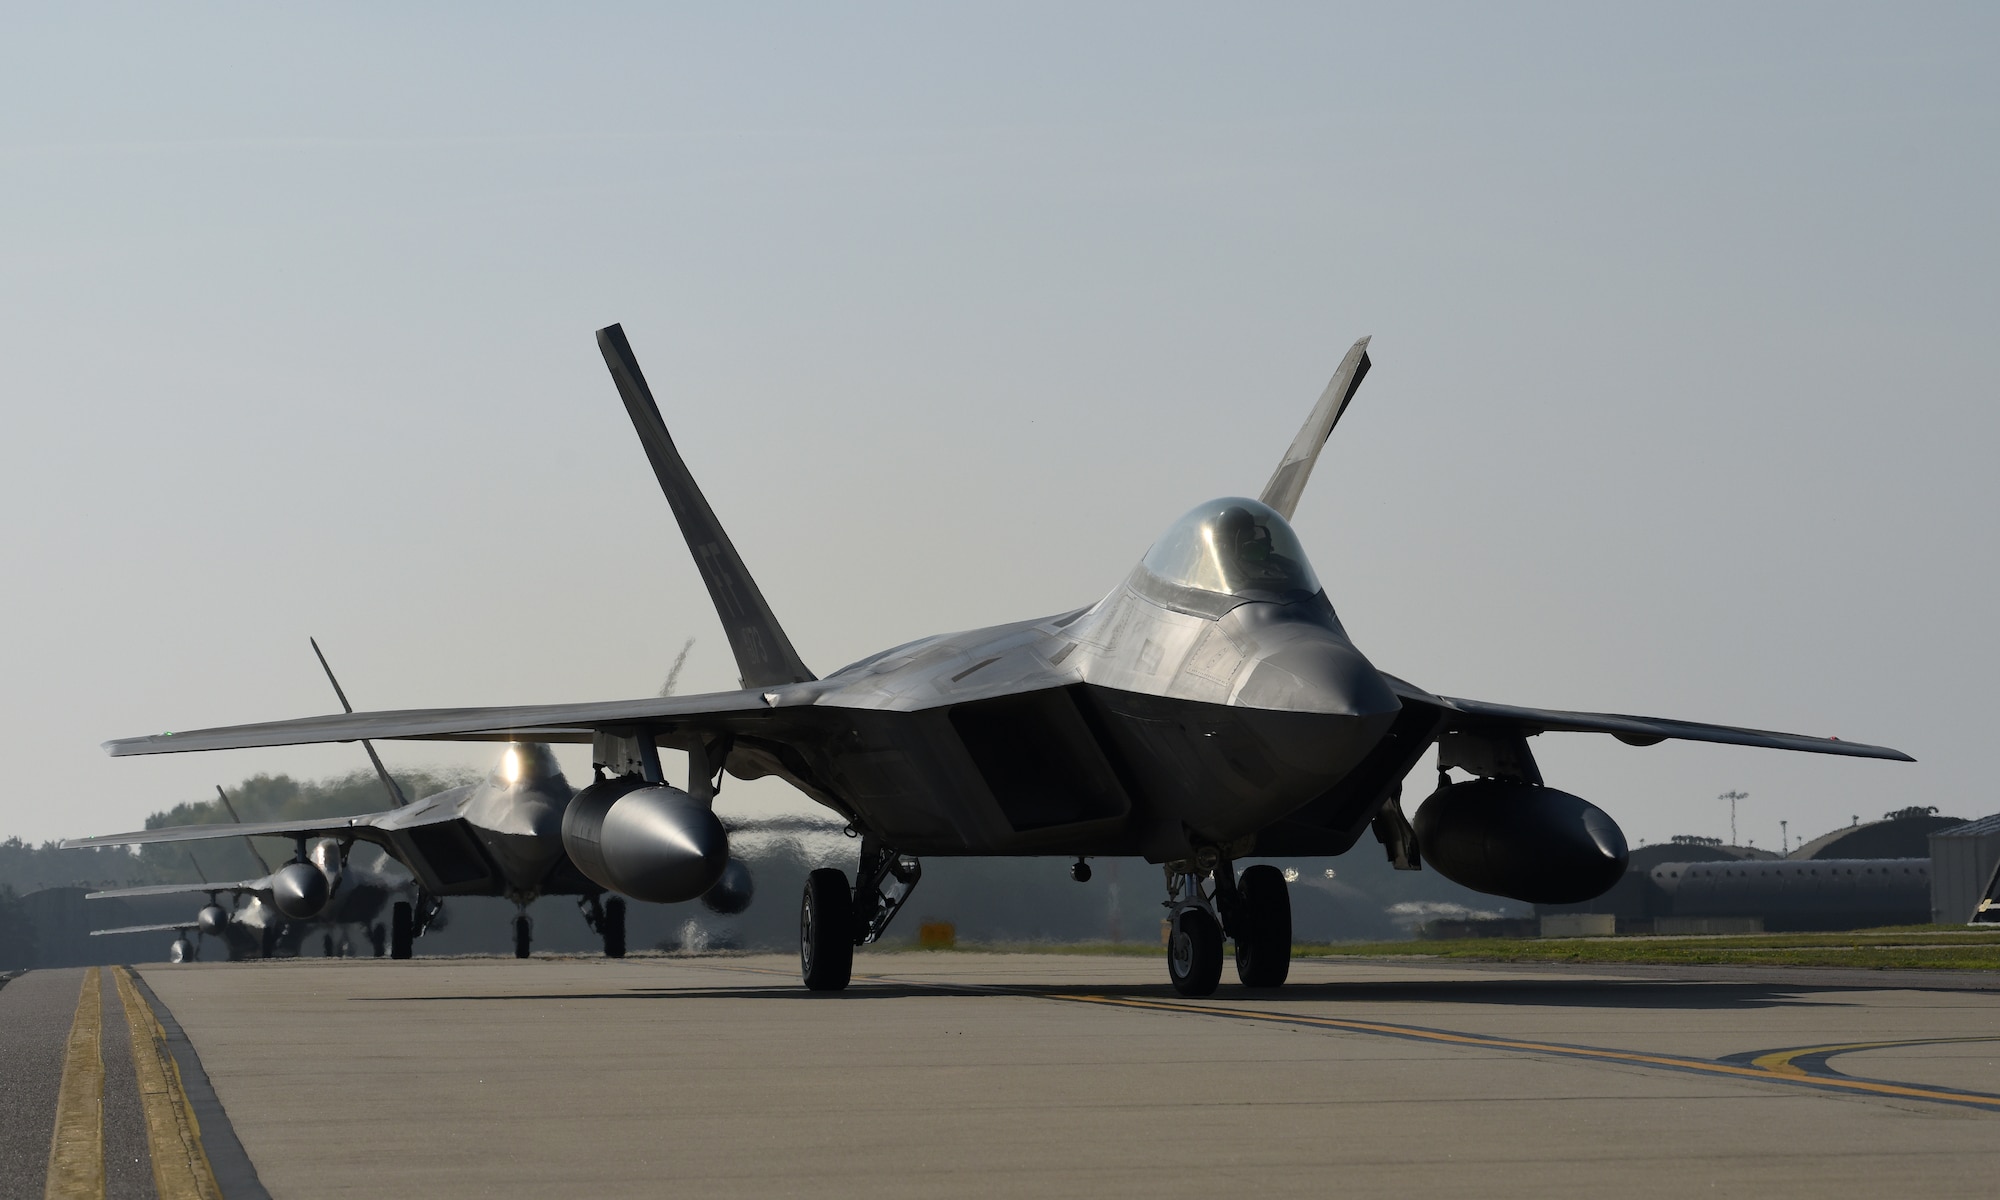 F-22 Raptors assigned to the 1st Fighter Wing, Joint Base Langley-Eustis, Va., taxi down the flightline at Royal Air Force Lakenheath, England, Oct. 5, 2018. As the world’s premiere operational 5th-generation fighter, the Raptor’s unique combination of stealth, speed, agility and situational awareness combined with lethal long-range air-to-air and air-to-ground weaponry make it the best air dominance fighter in the world. (U.S. Air Force photo/Staff Sgt. Alex Fox Echols III)